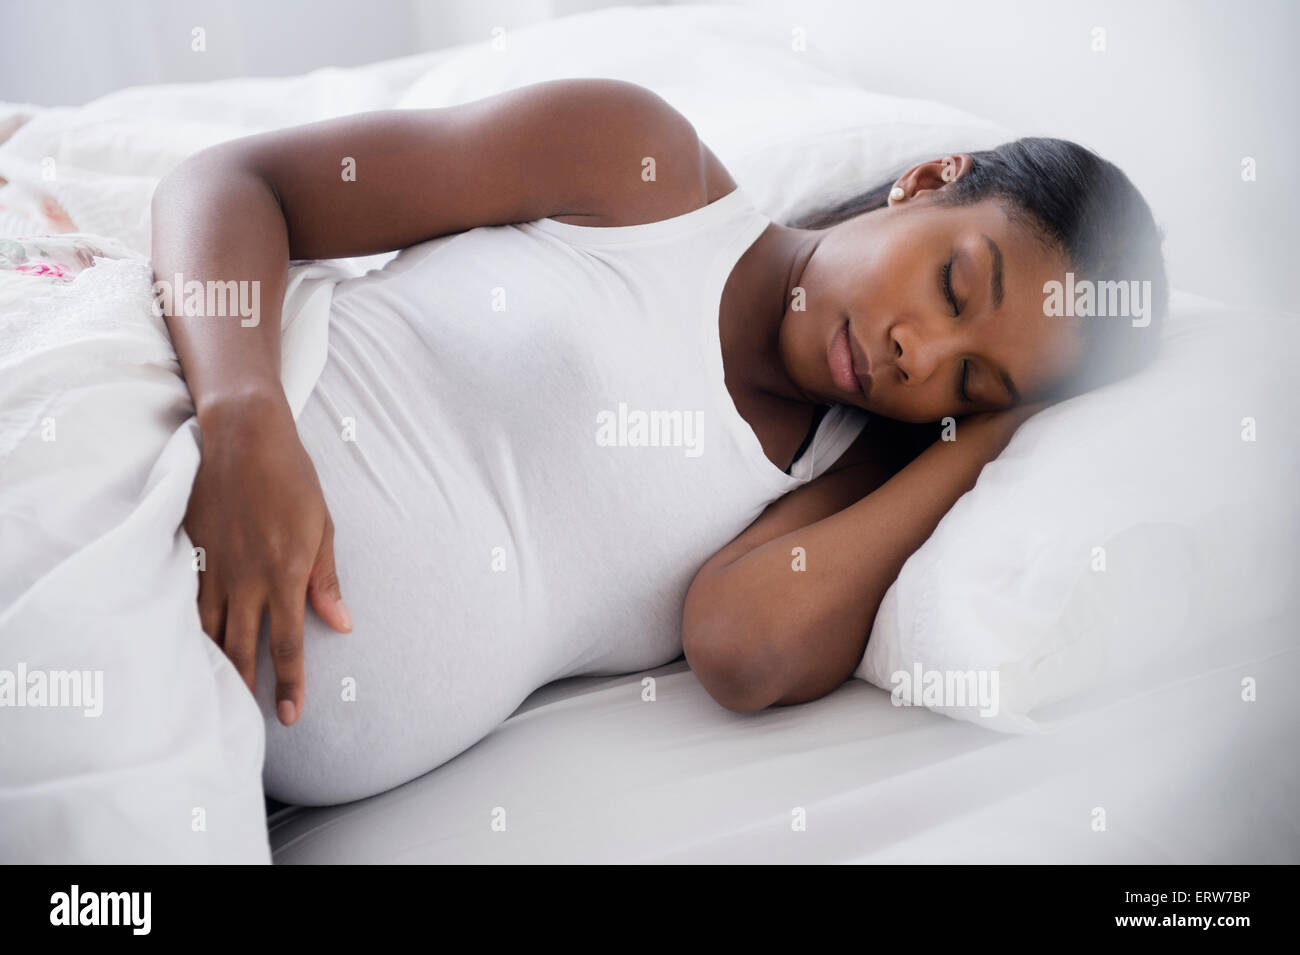 Black pregnant woman sleeping in bed Banque D'Images